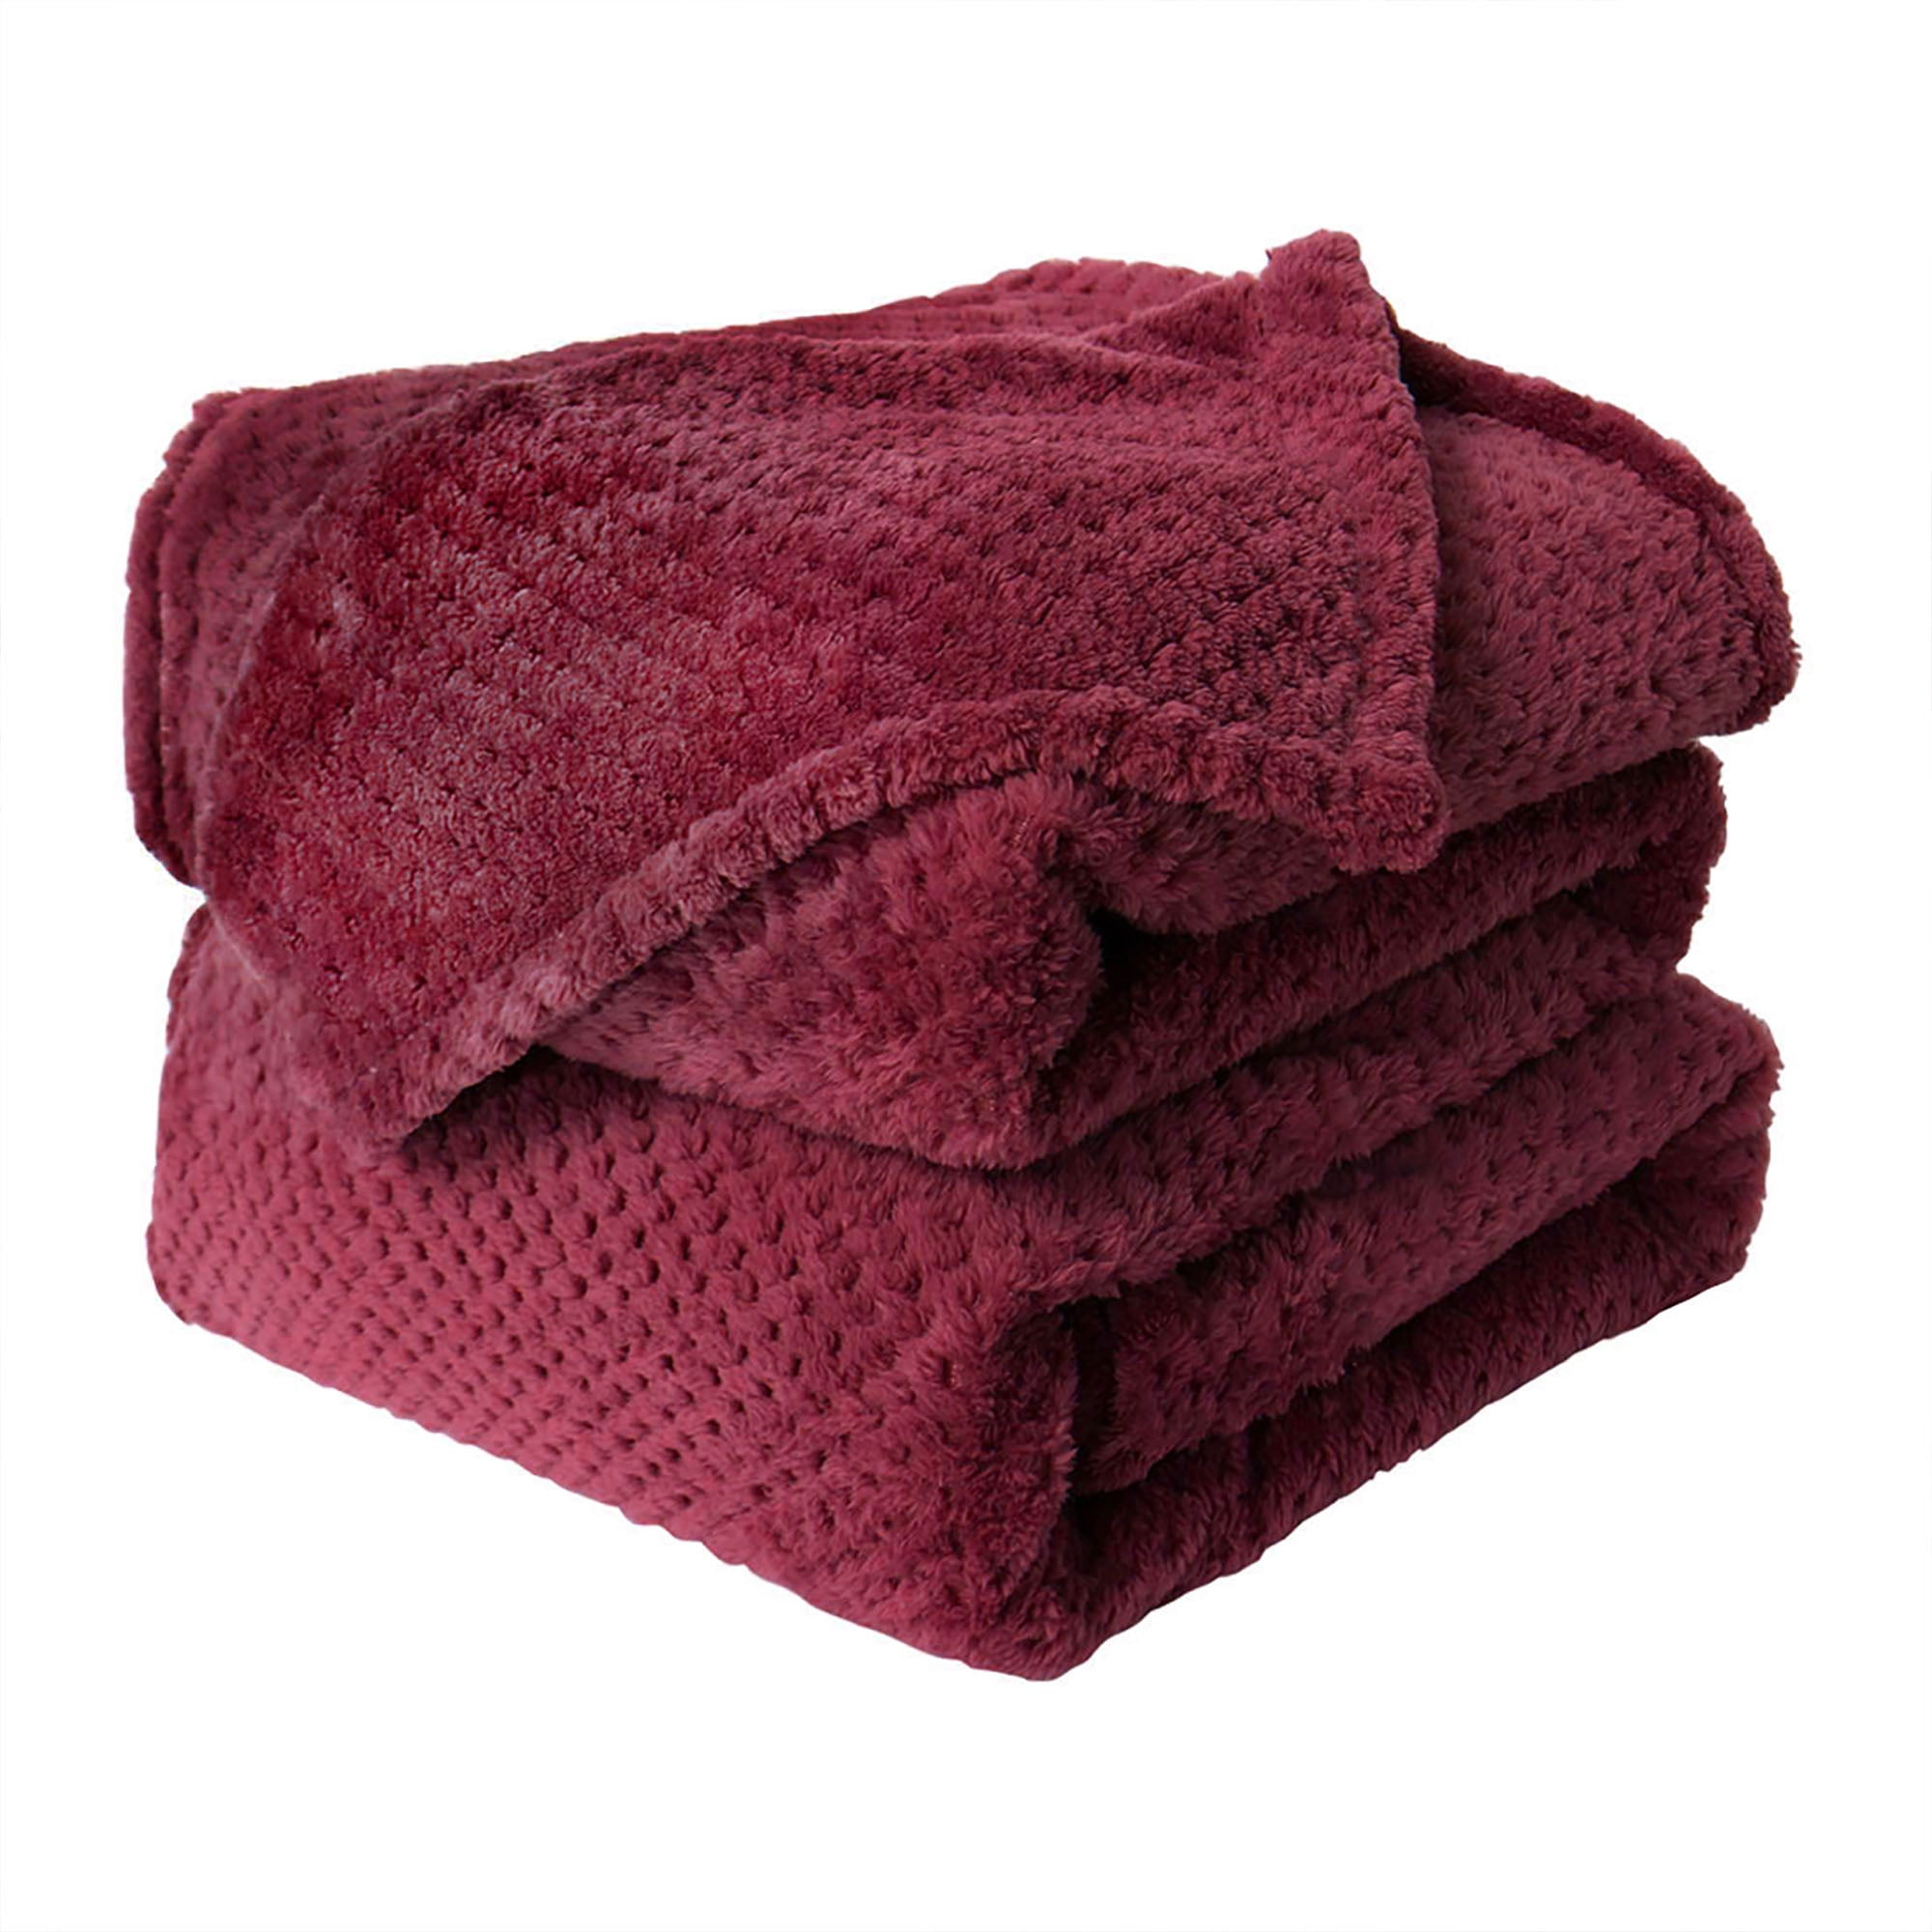 Red Rose,All-Season Flannel Blanket Throw Blankets-Soft Warm and Lightweight 